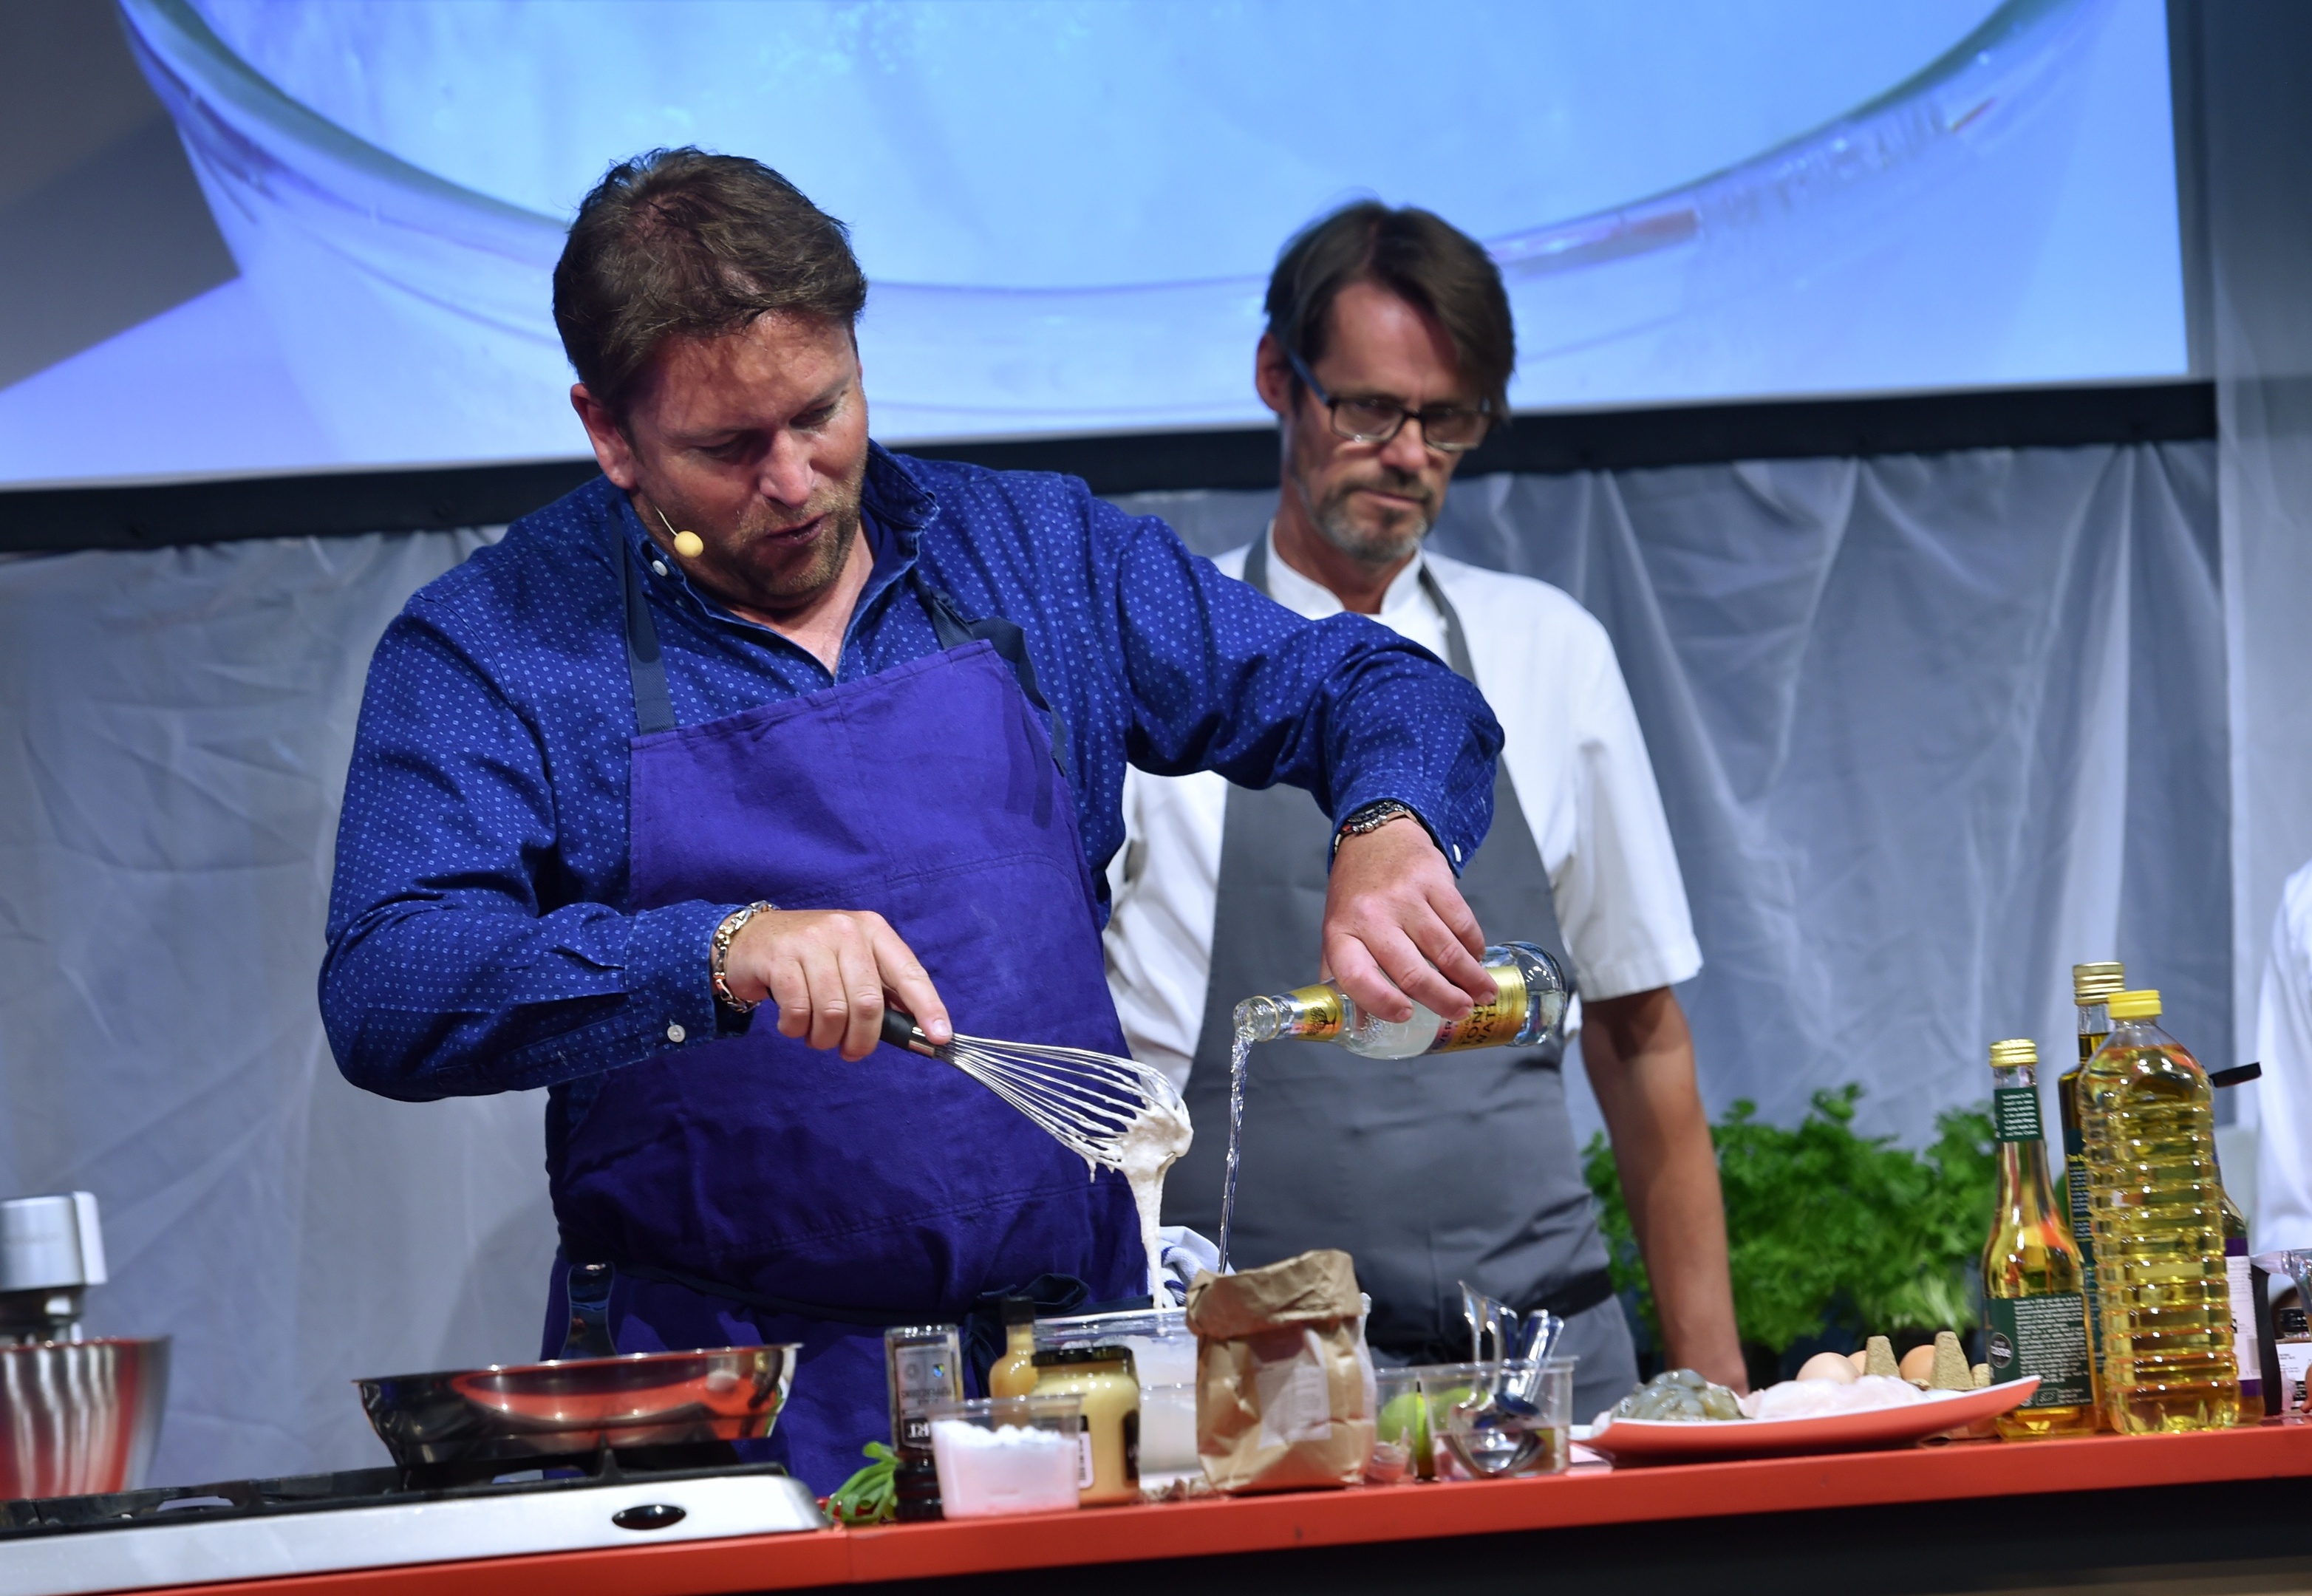 James Martin performing a cooking demonstration (Colin Rennie / DCT Media)